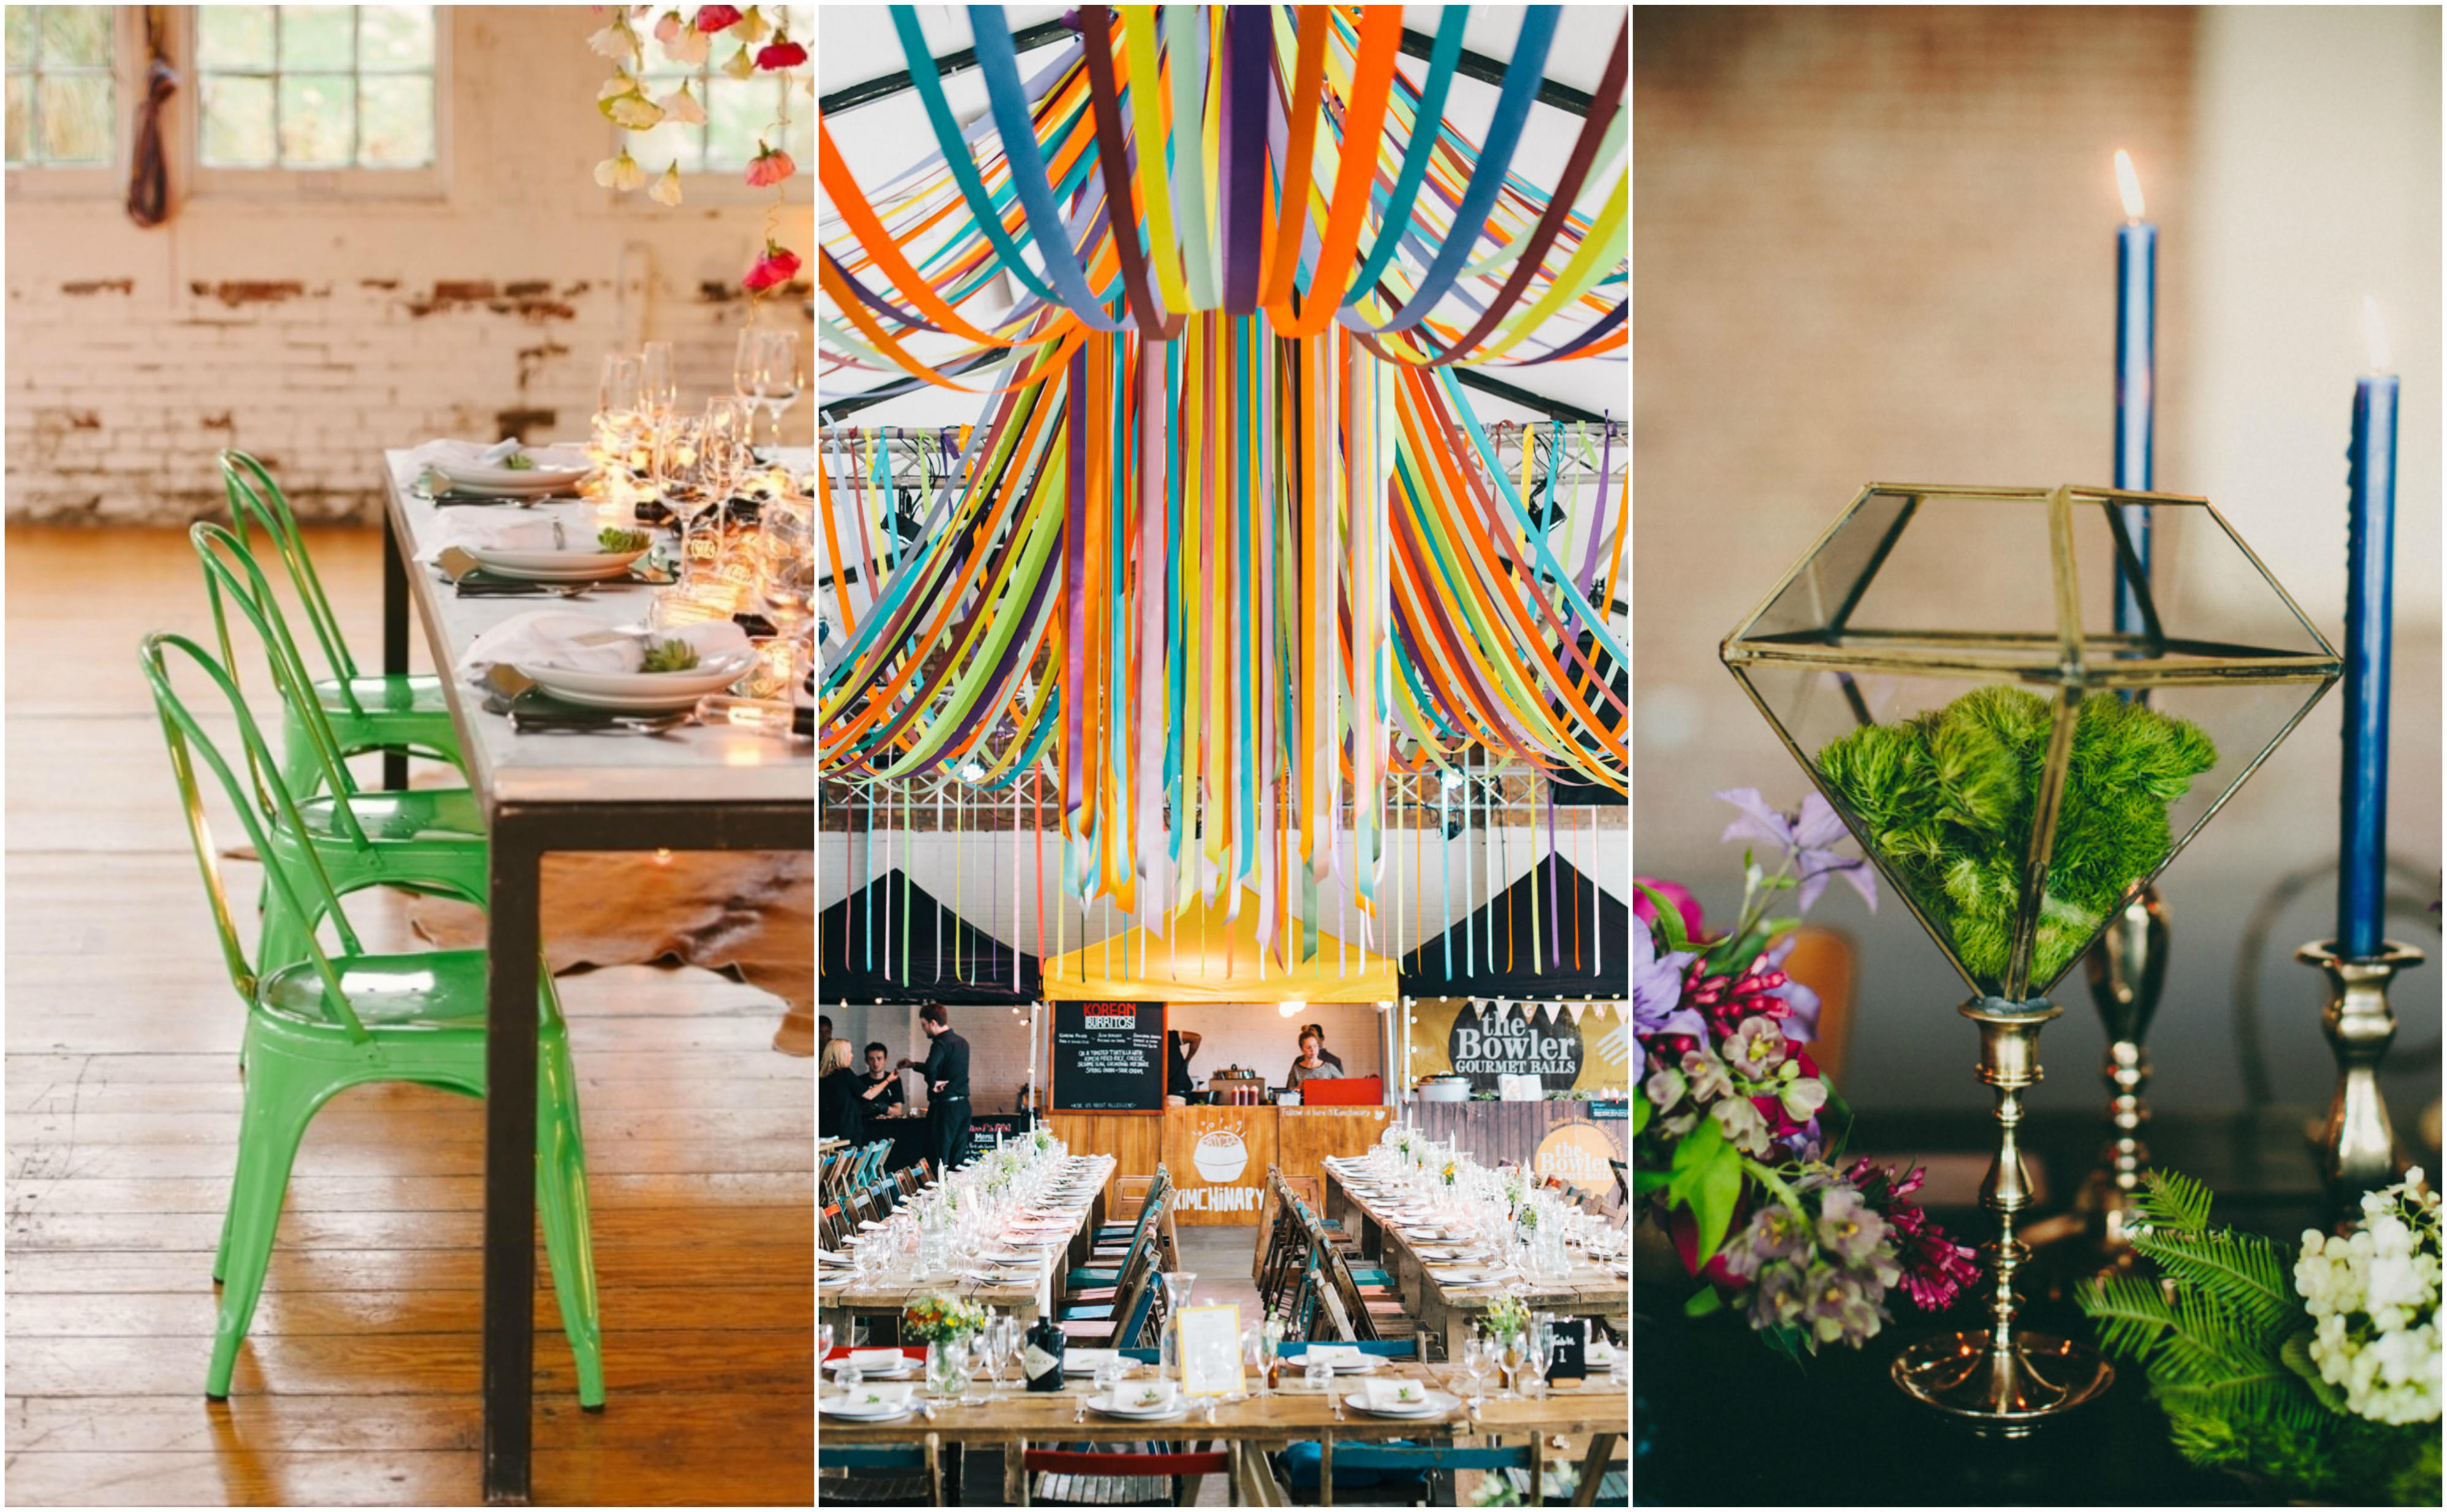 4 Ideas for Styling an Industrial Wedding Table